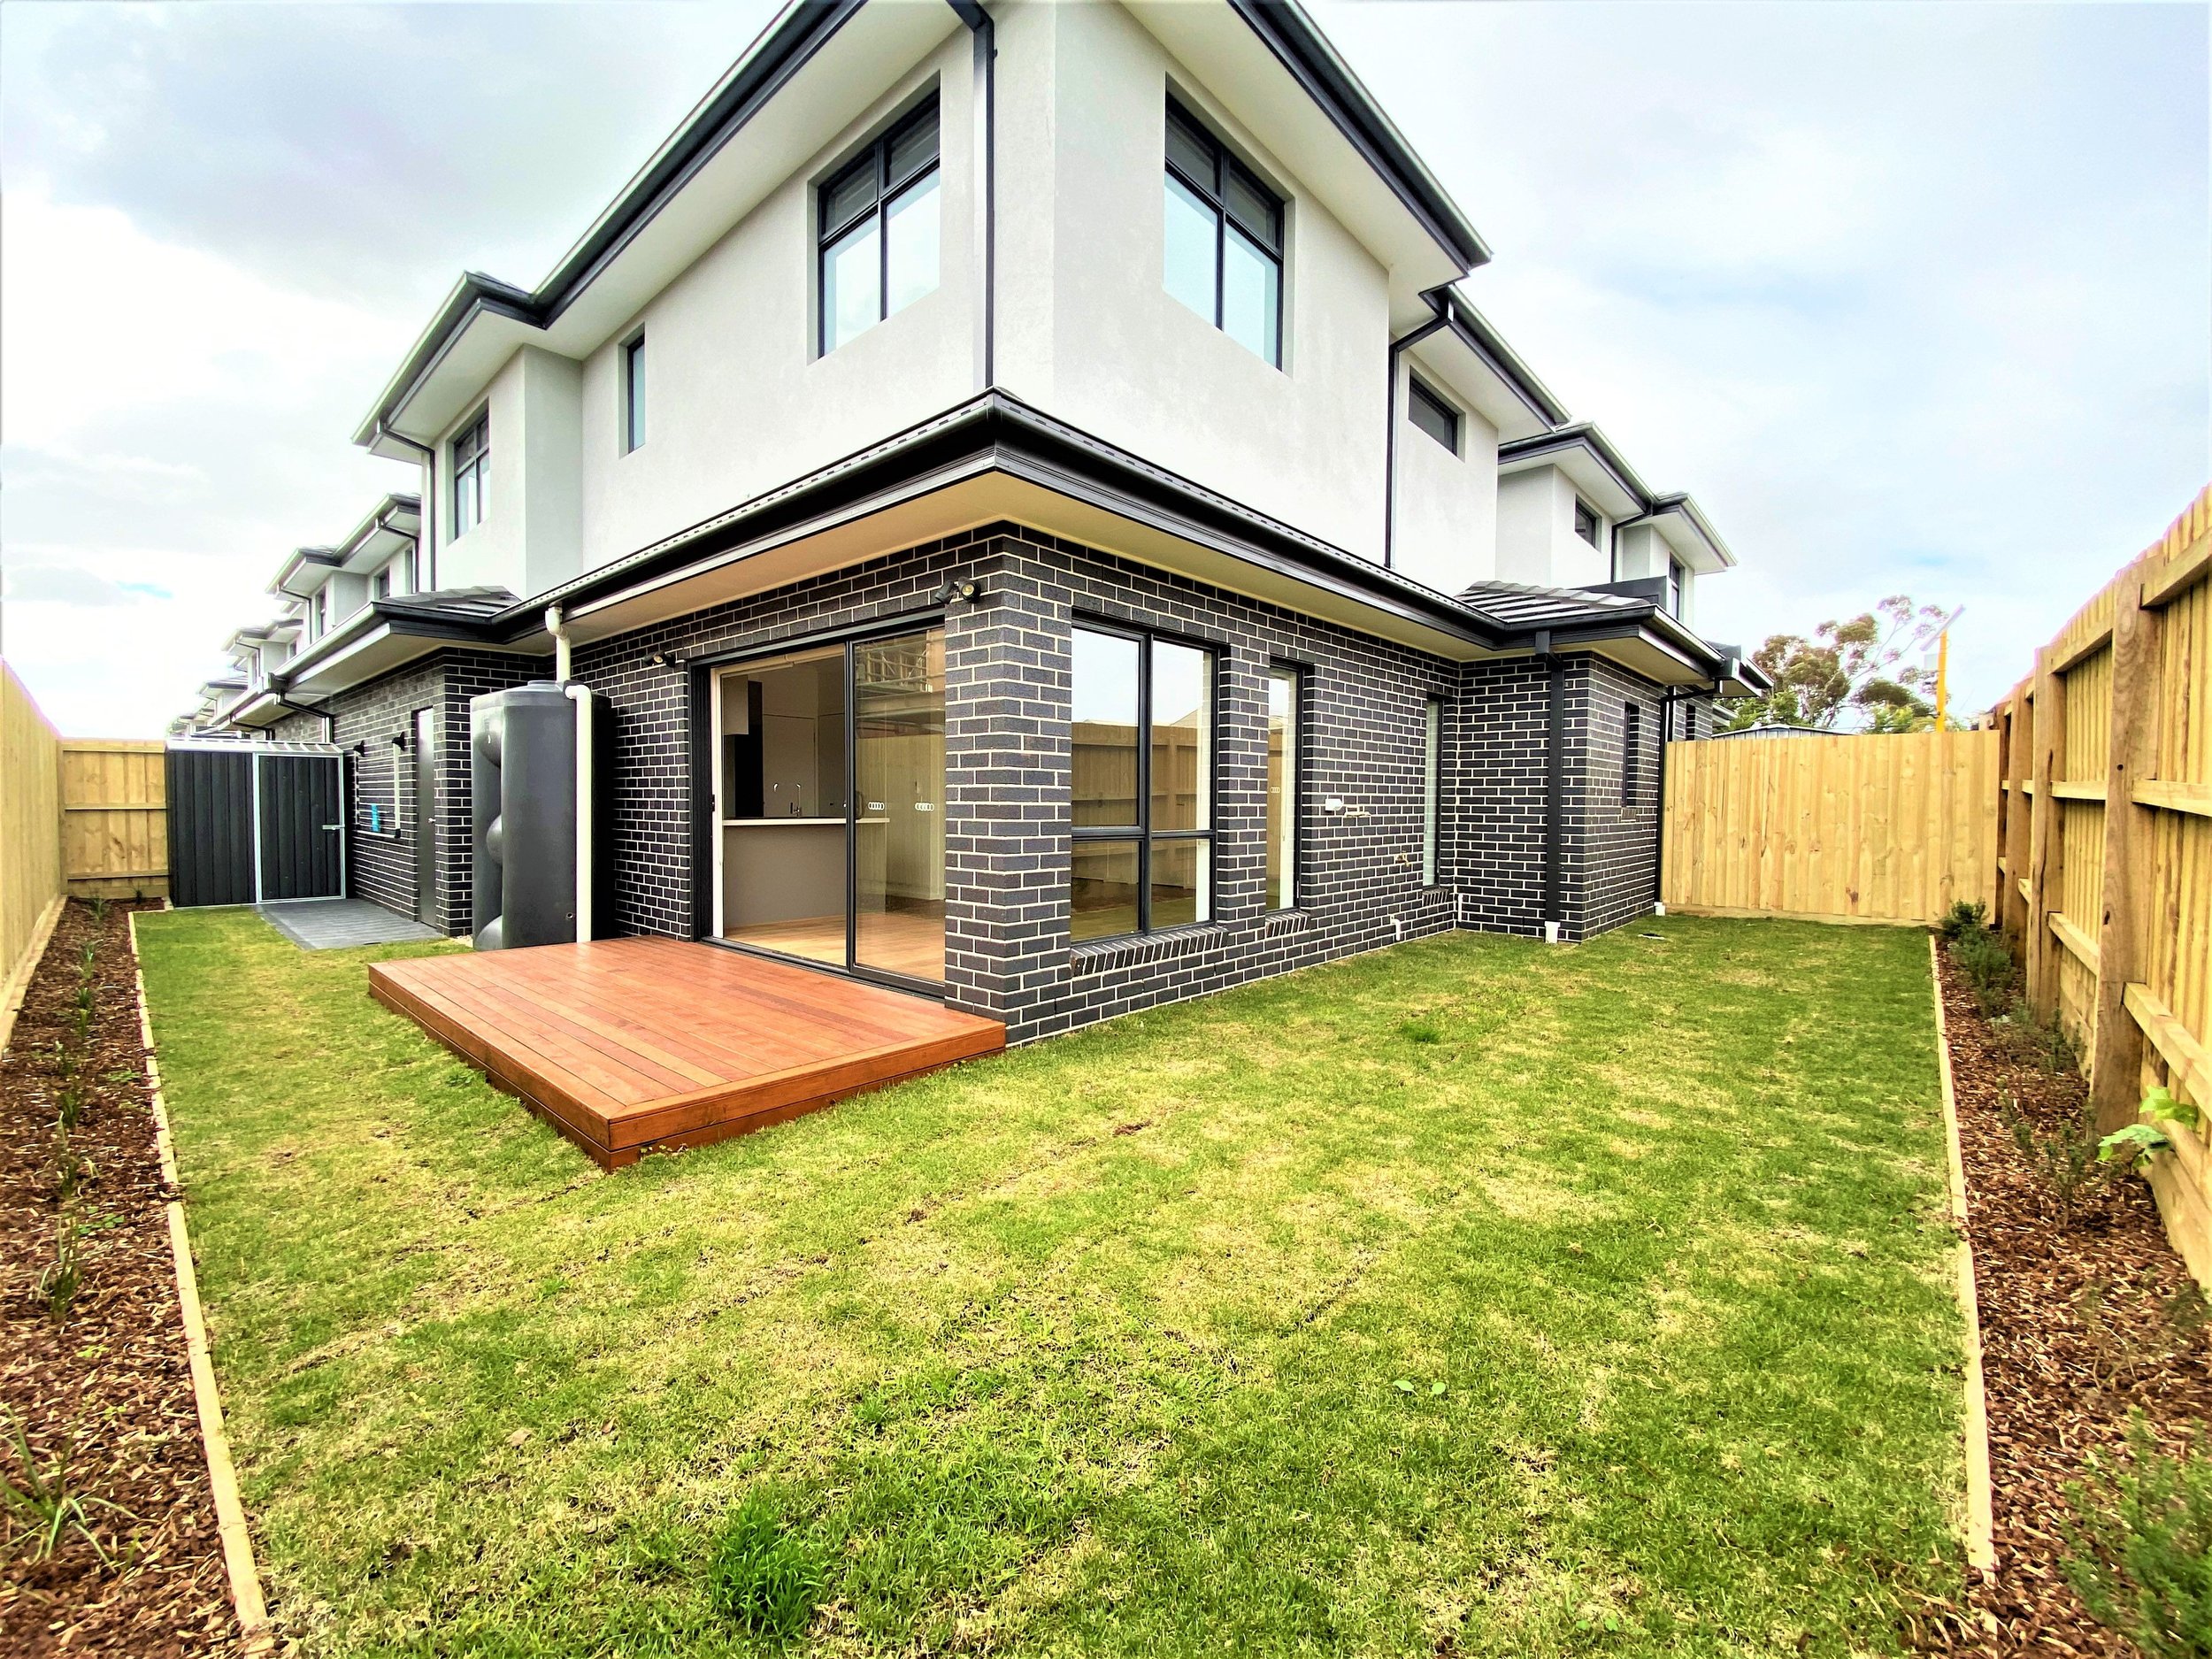 Westmeadows - 15 Hillcrest Drive, Westmeadows, VIC 3049 - Townly - 22.jpg